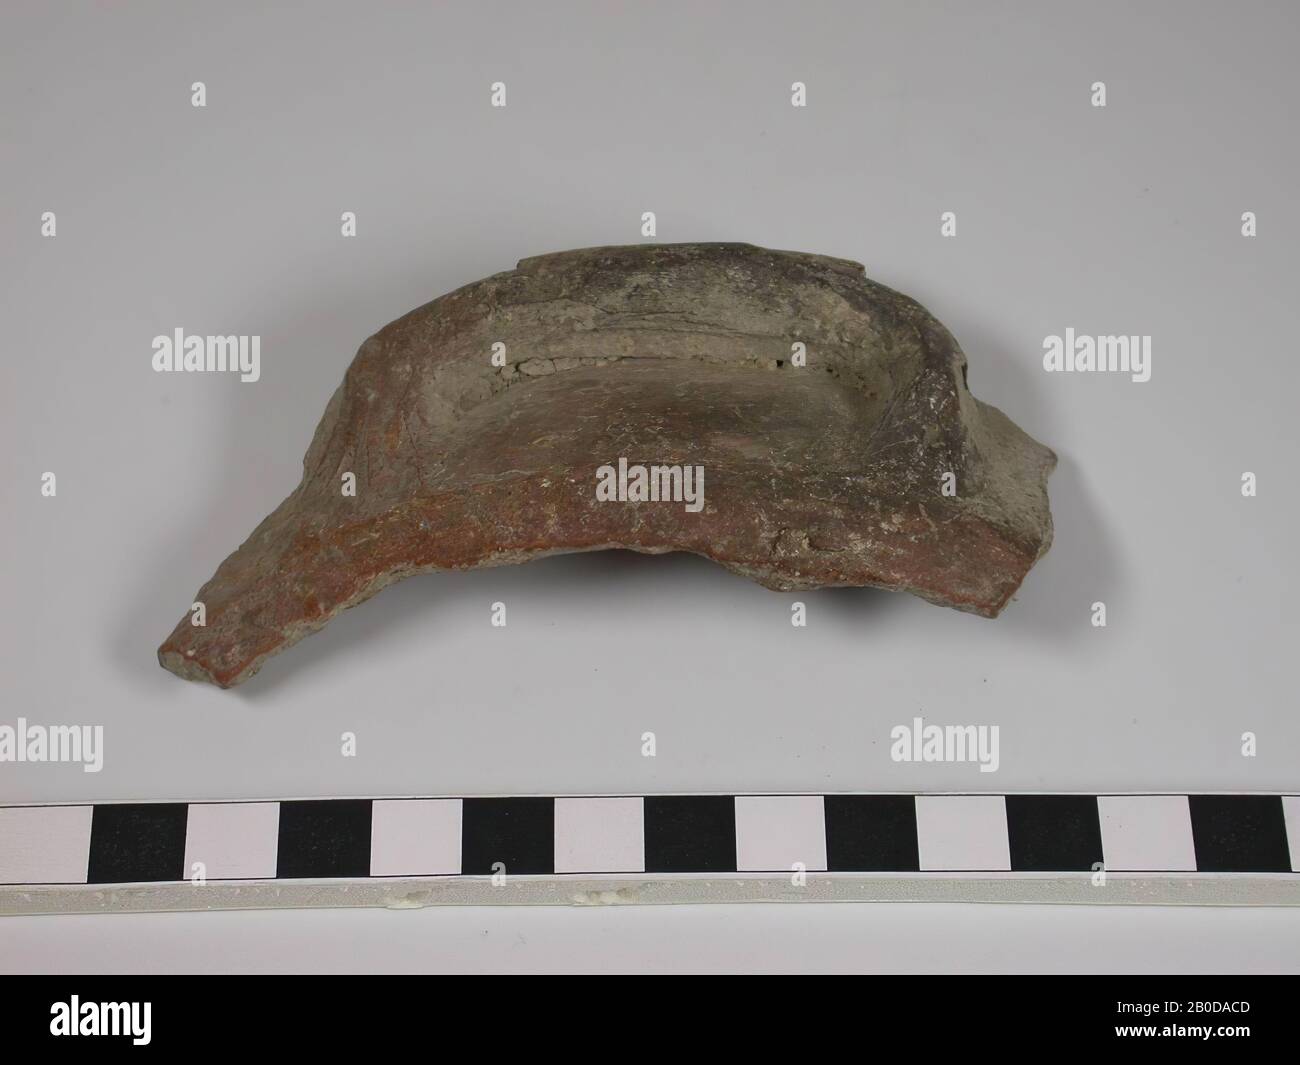 Fragment of a cooking pot including handle. The fragment contains a part of the edge and the wall. The handle is completely plastered against the wall and edge. The edge is clearly projecting but does not take the handle with it. The color is dark red. The handle contains some black discolouration which may indicate use in fire., Crockery, pottery, L 10.3 cm, W 5.4 cm, Hellenistic Period 332-63 BC, Palestine Stock Photo